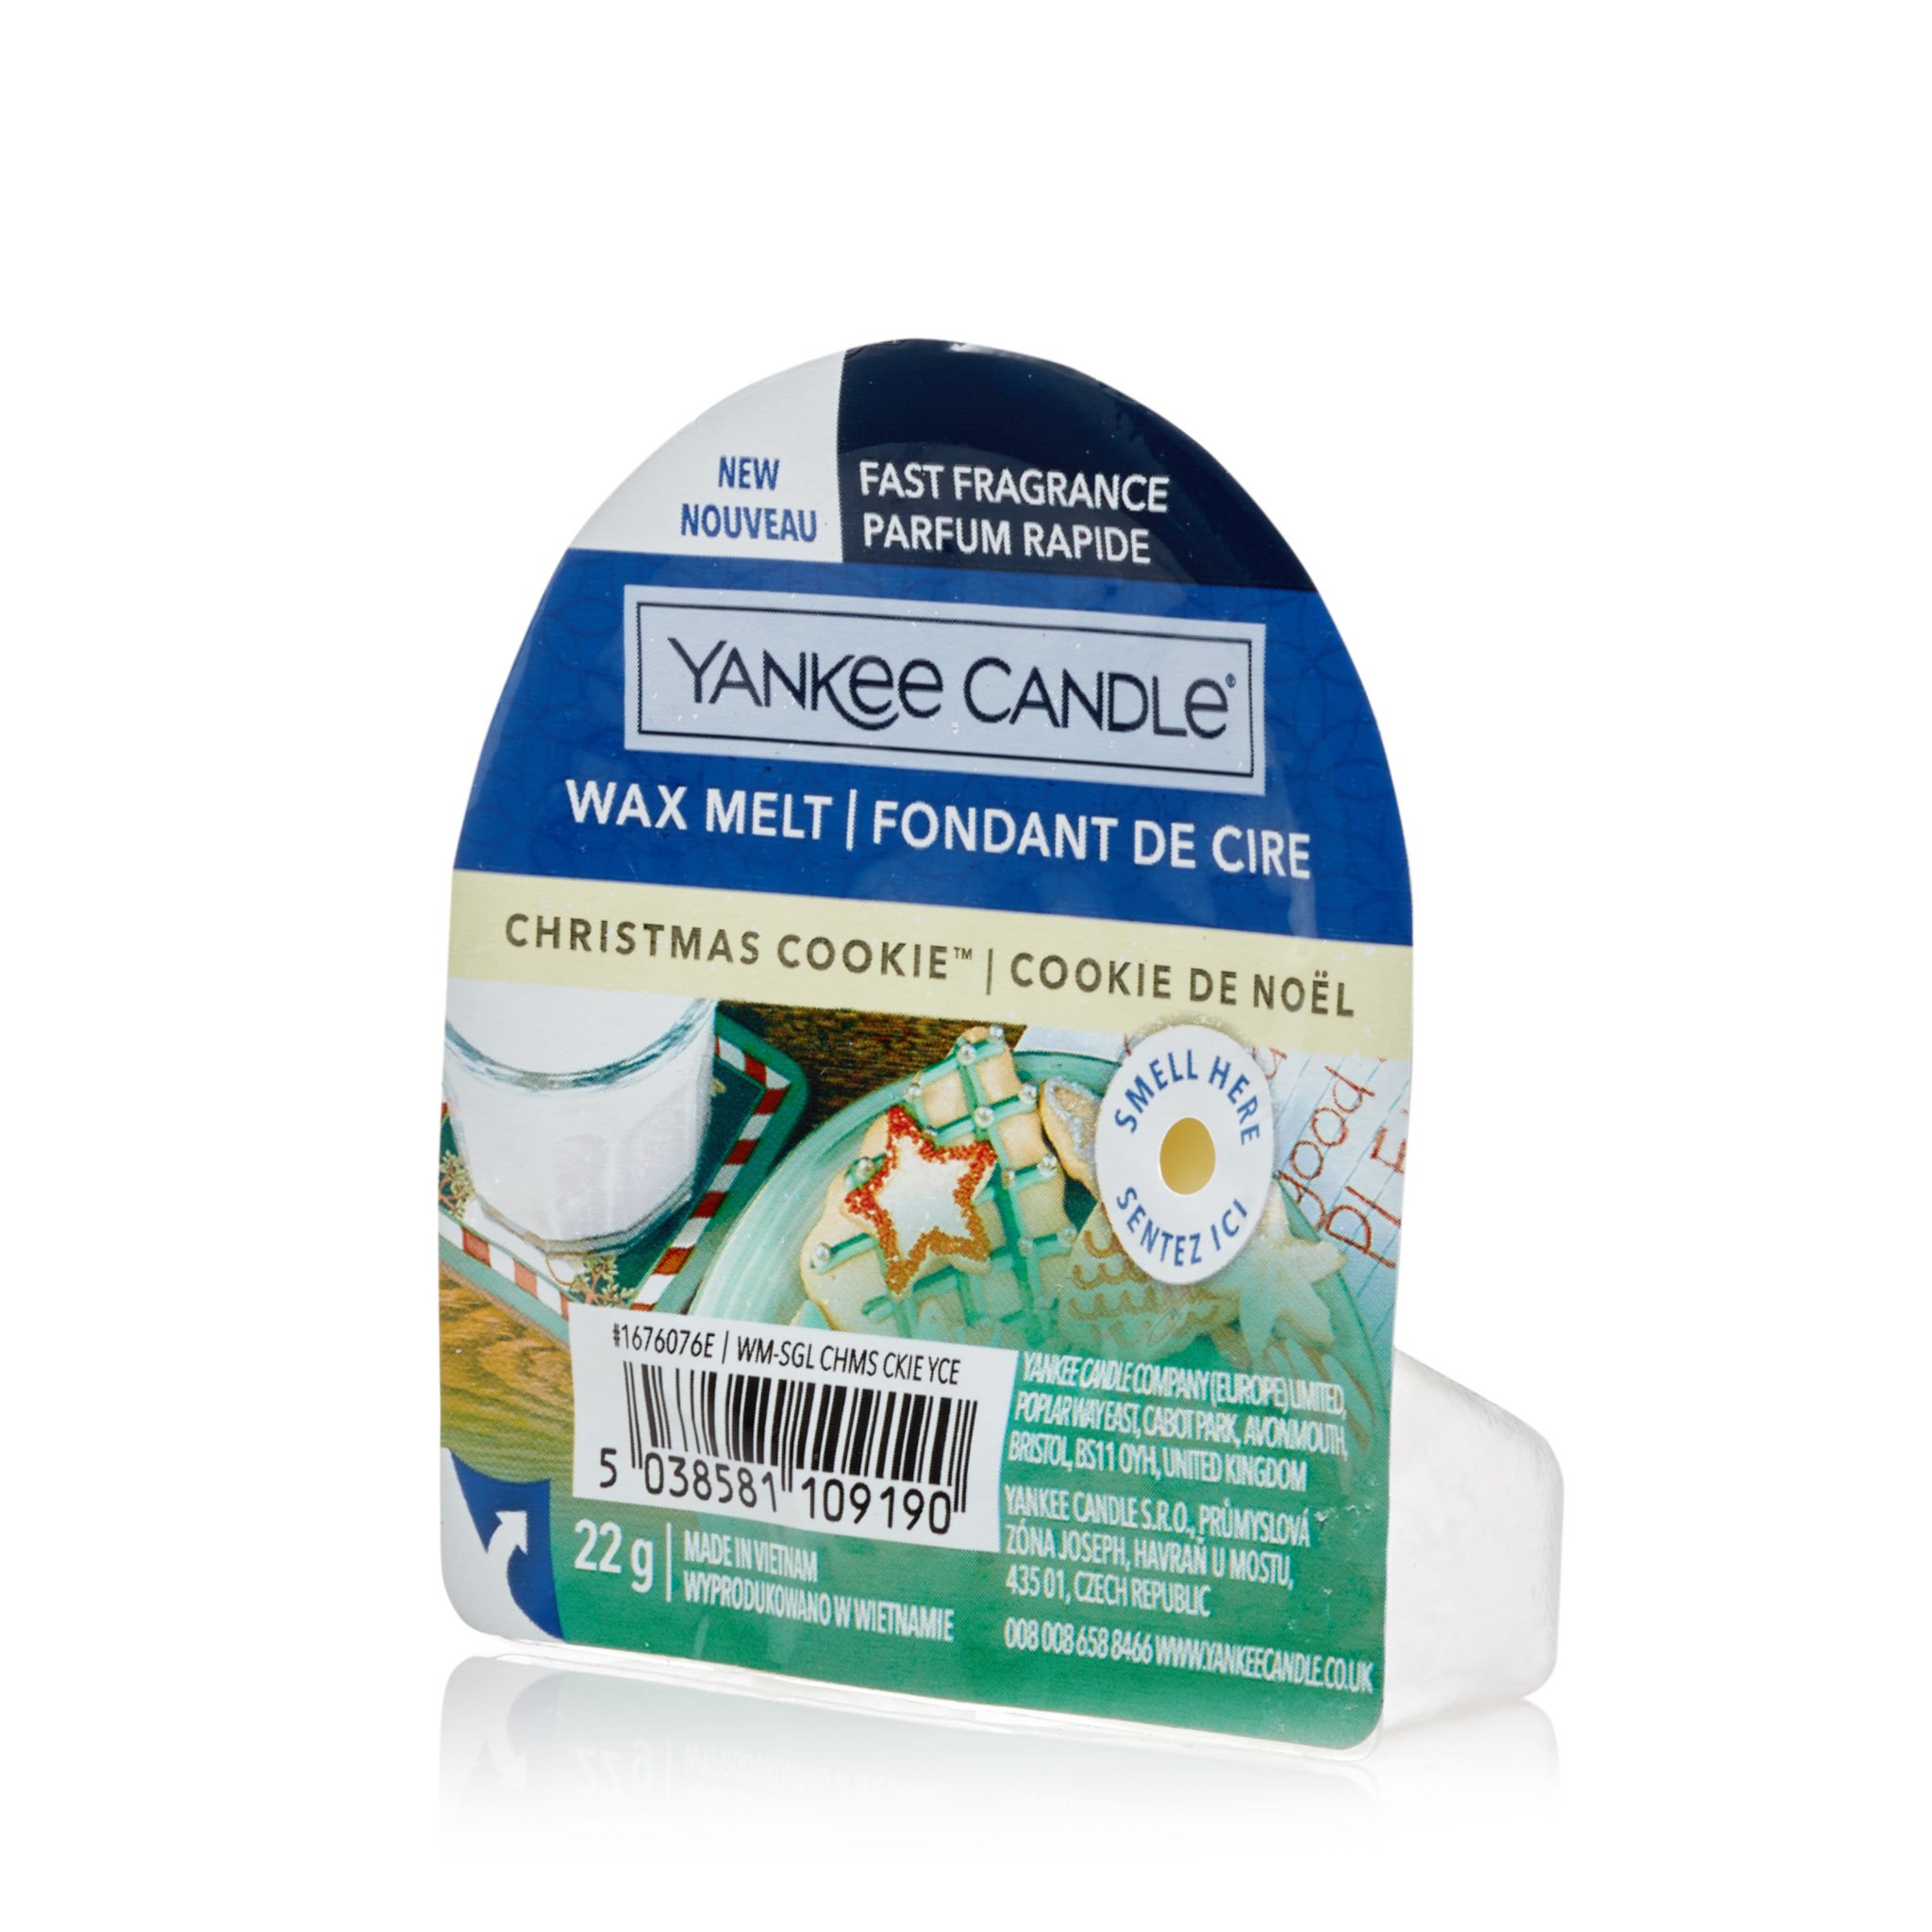 Yankee Candle Christmas Cookie Tarts Wax Melts - Scented Wax